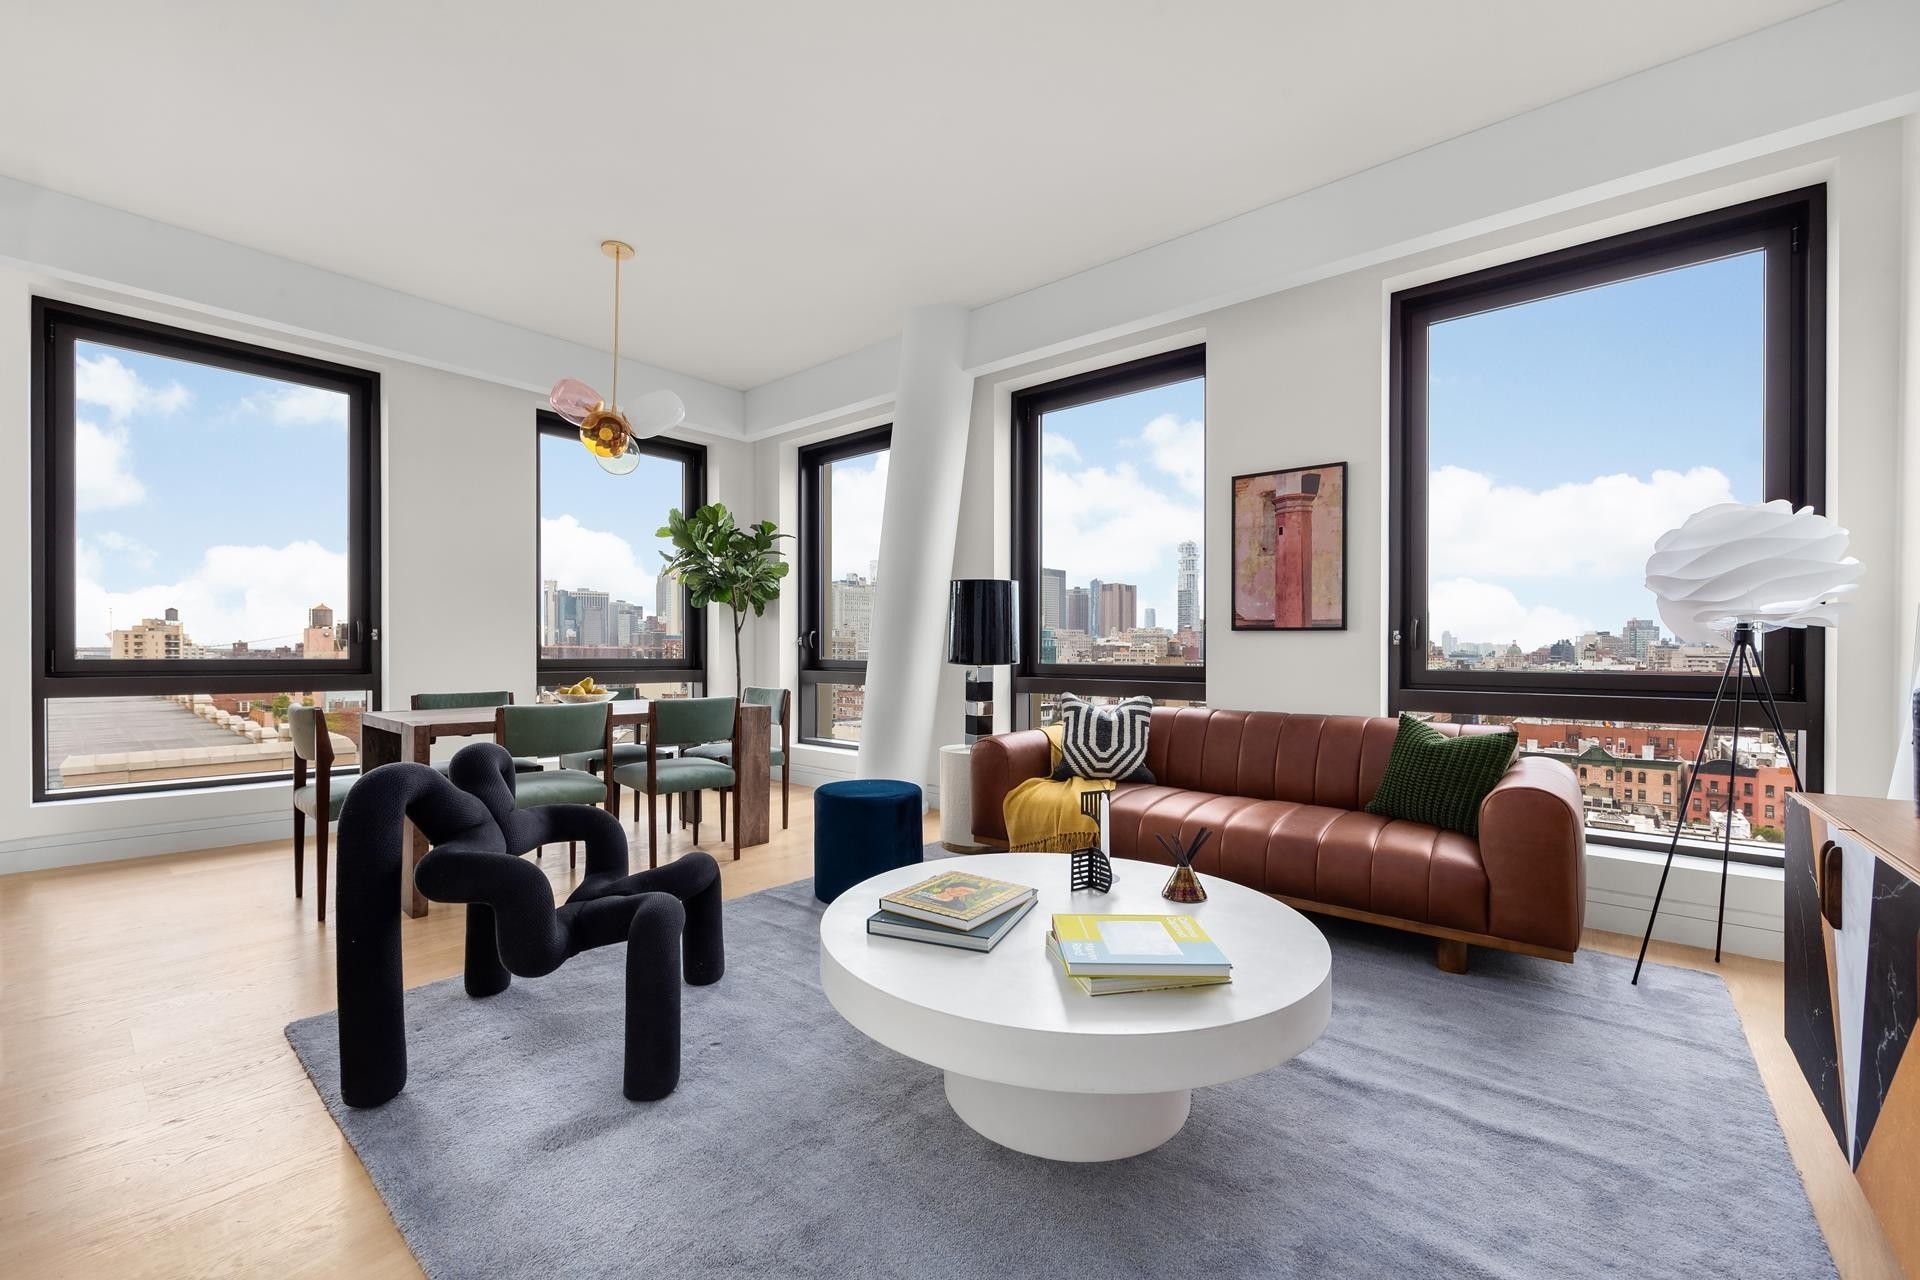 Condominium for Sale at Essex Crossing, 242 BROOME ST, 11B Lower East Side, New York, New York 10002